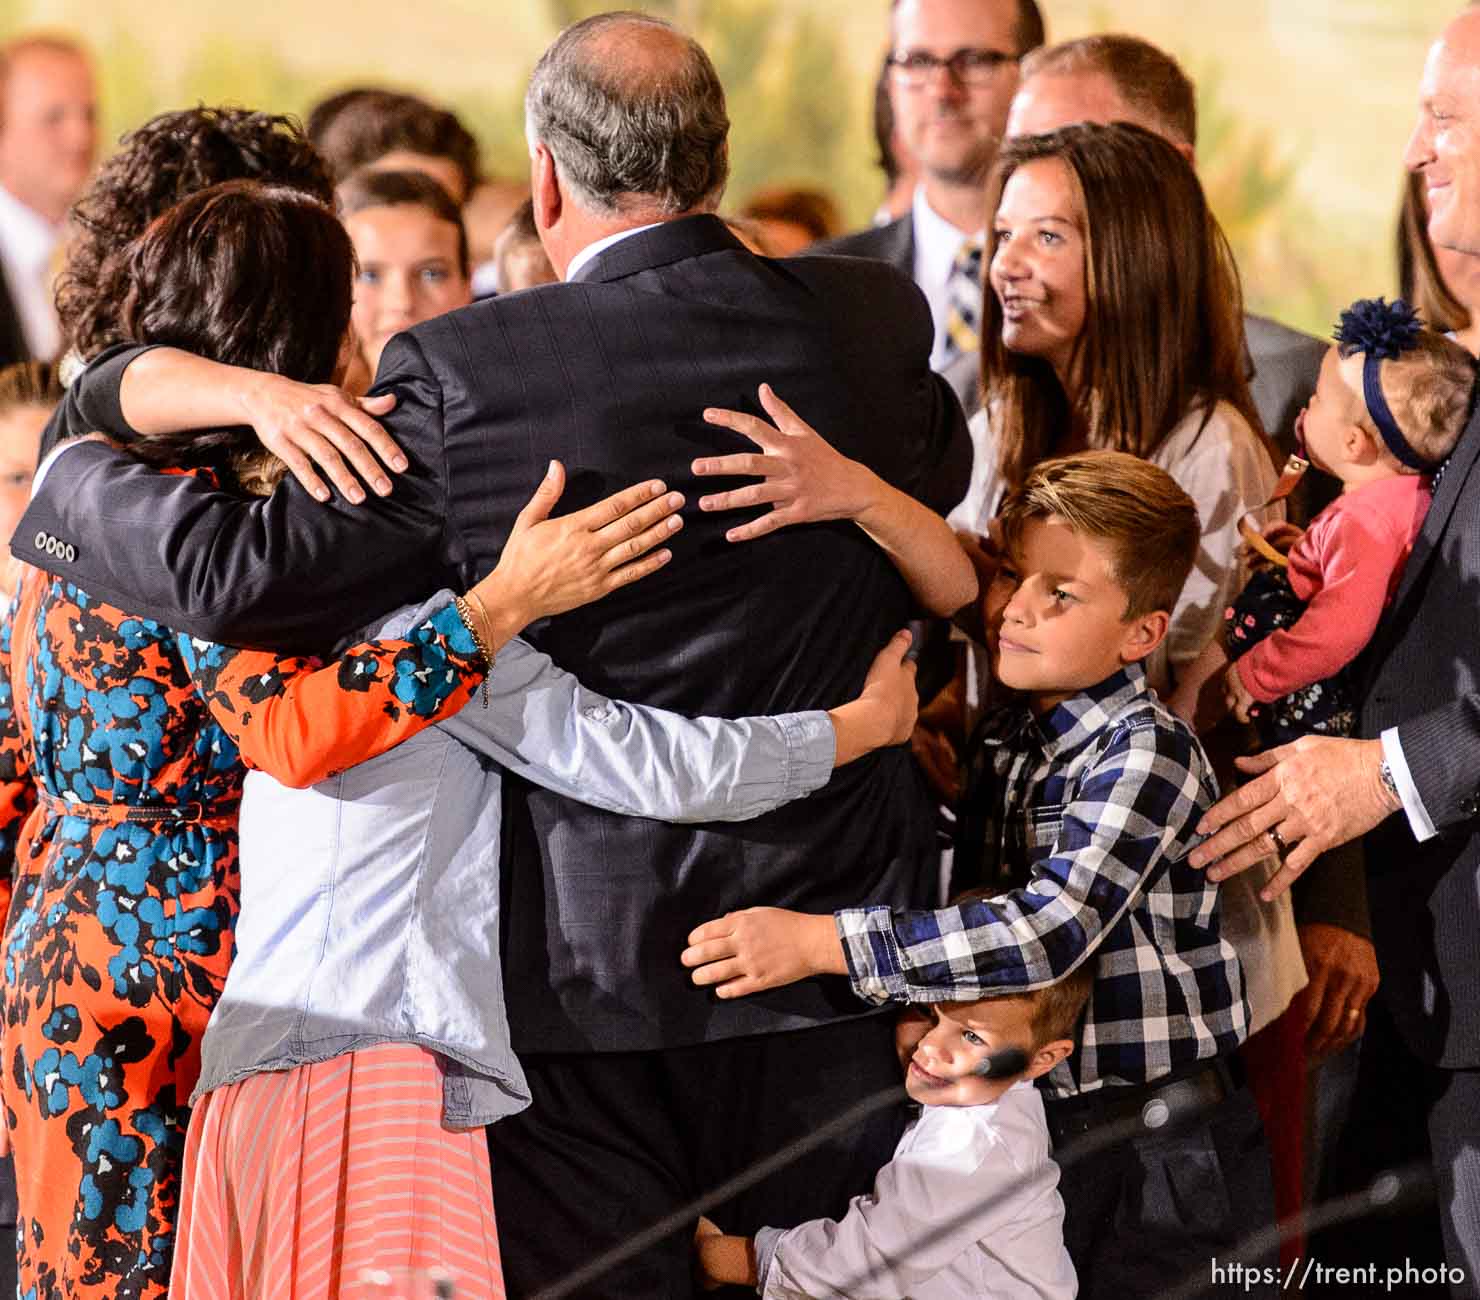 Trent Nelson  |  The Salt Lake Tribune
New LDS apostle Ronald A. Rasband is embraced by family after a press conference during the 185th Semiannual General Conference of the LDS Church in Salt Lake City, Saturday October 3, 2015.